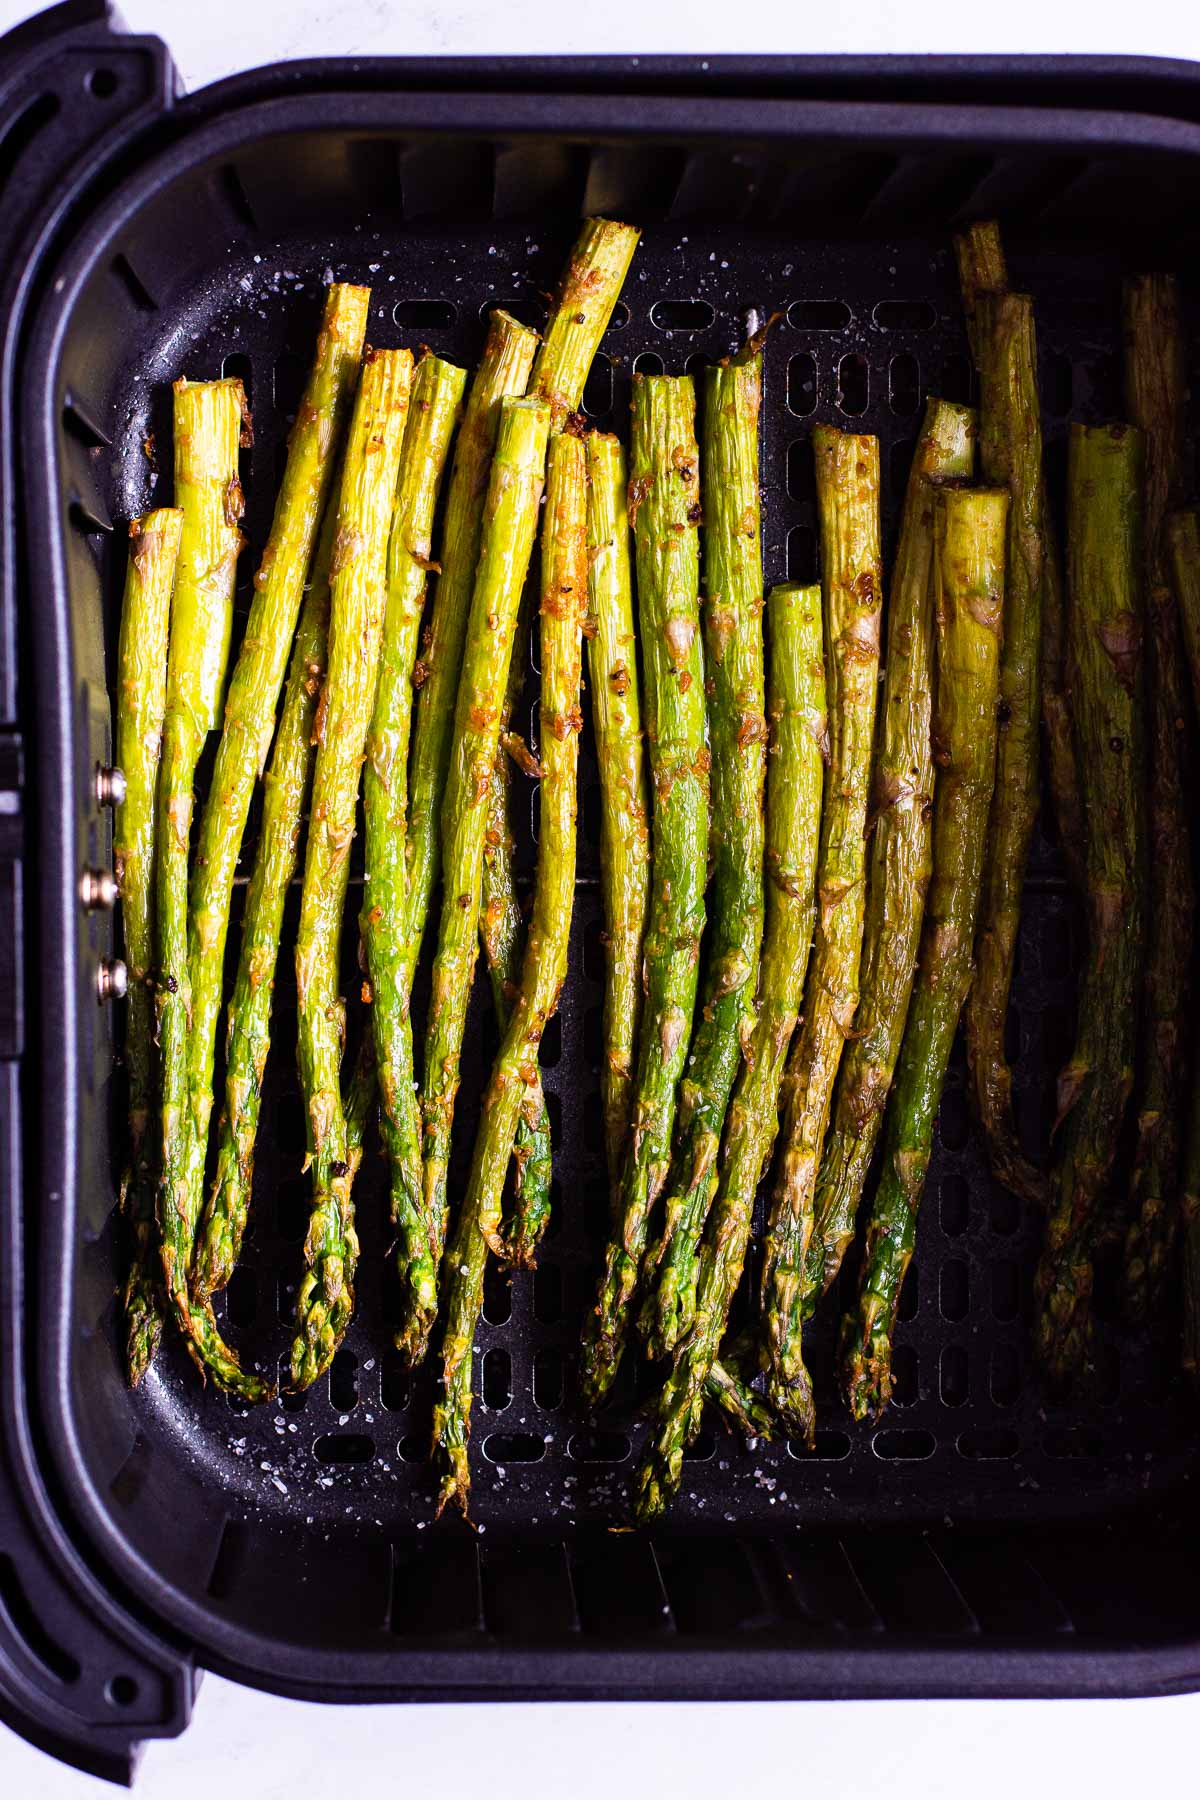 Cooked air fryer asparagus recipe with golden brown bits and seasoned with salt.